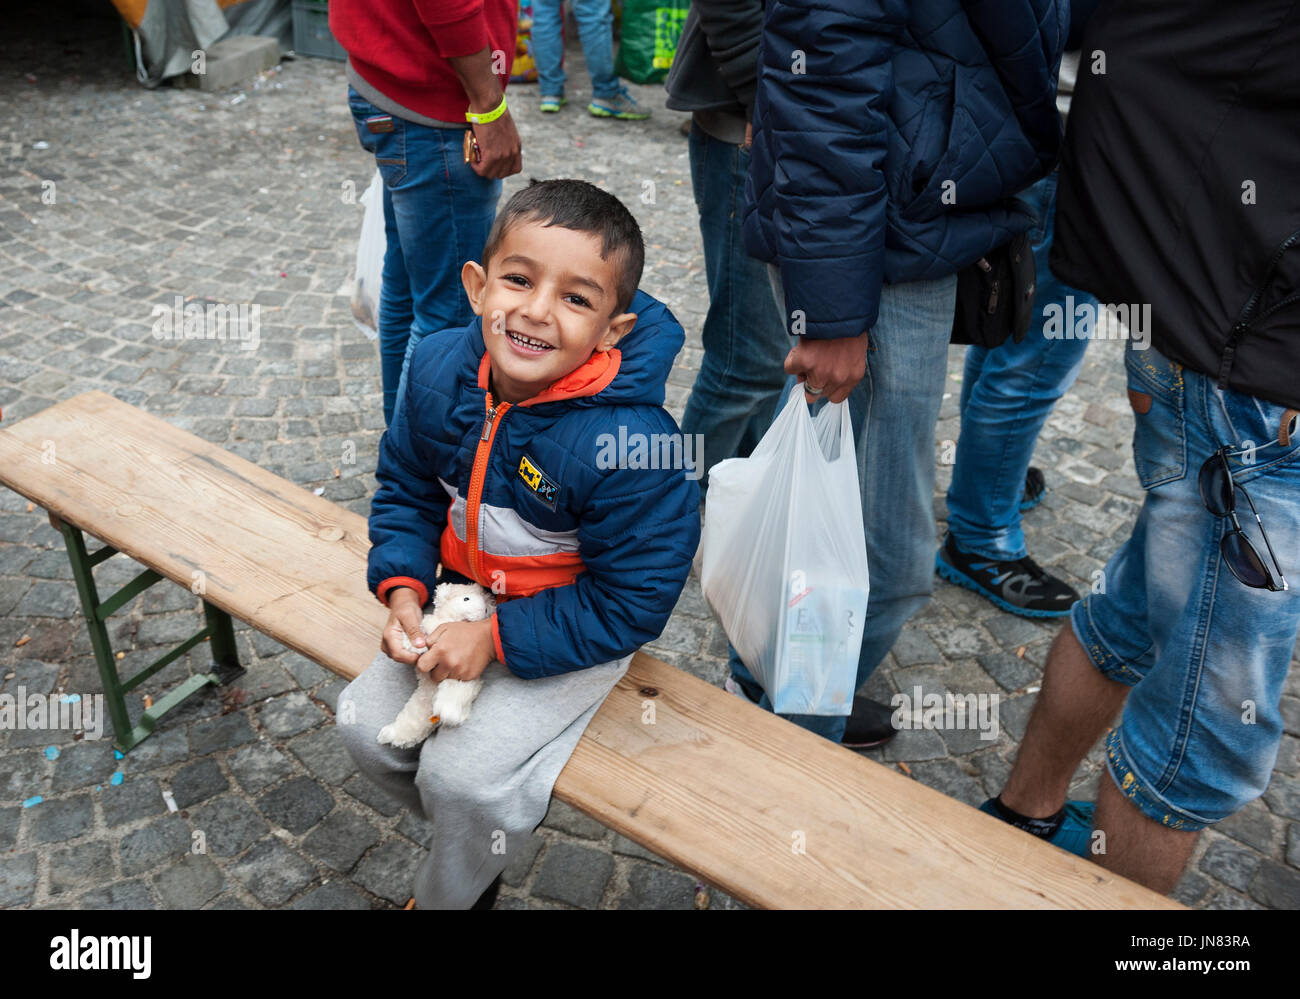 Munich, Germany -September 7th, 2015: Refugee child from Syria at Munich Central Station, Germany. The young boy smiles after arriving in Germany. Stock Photo